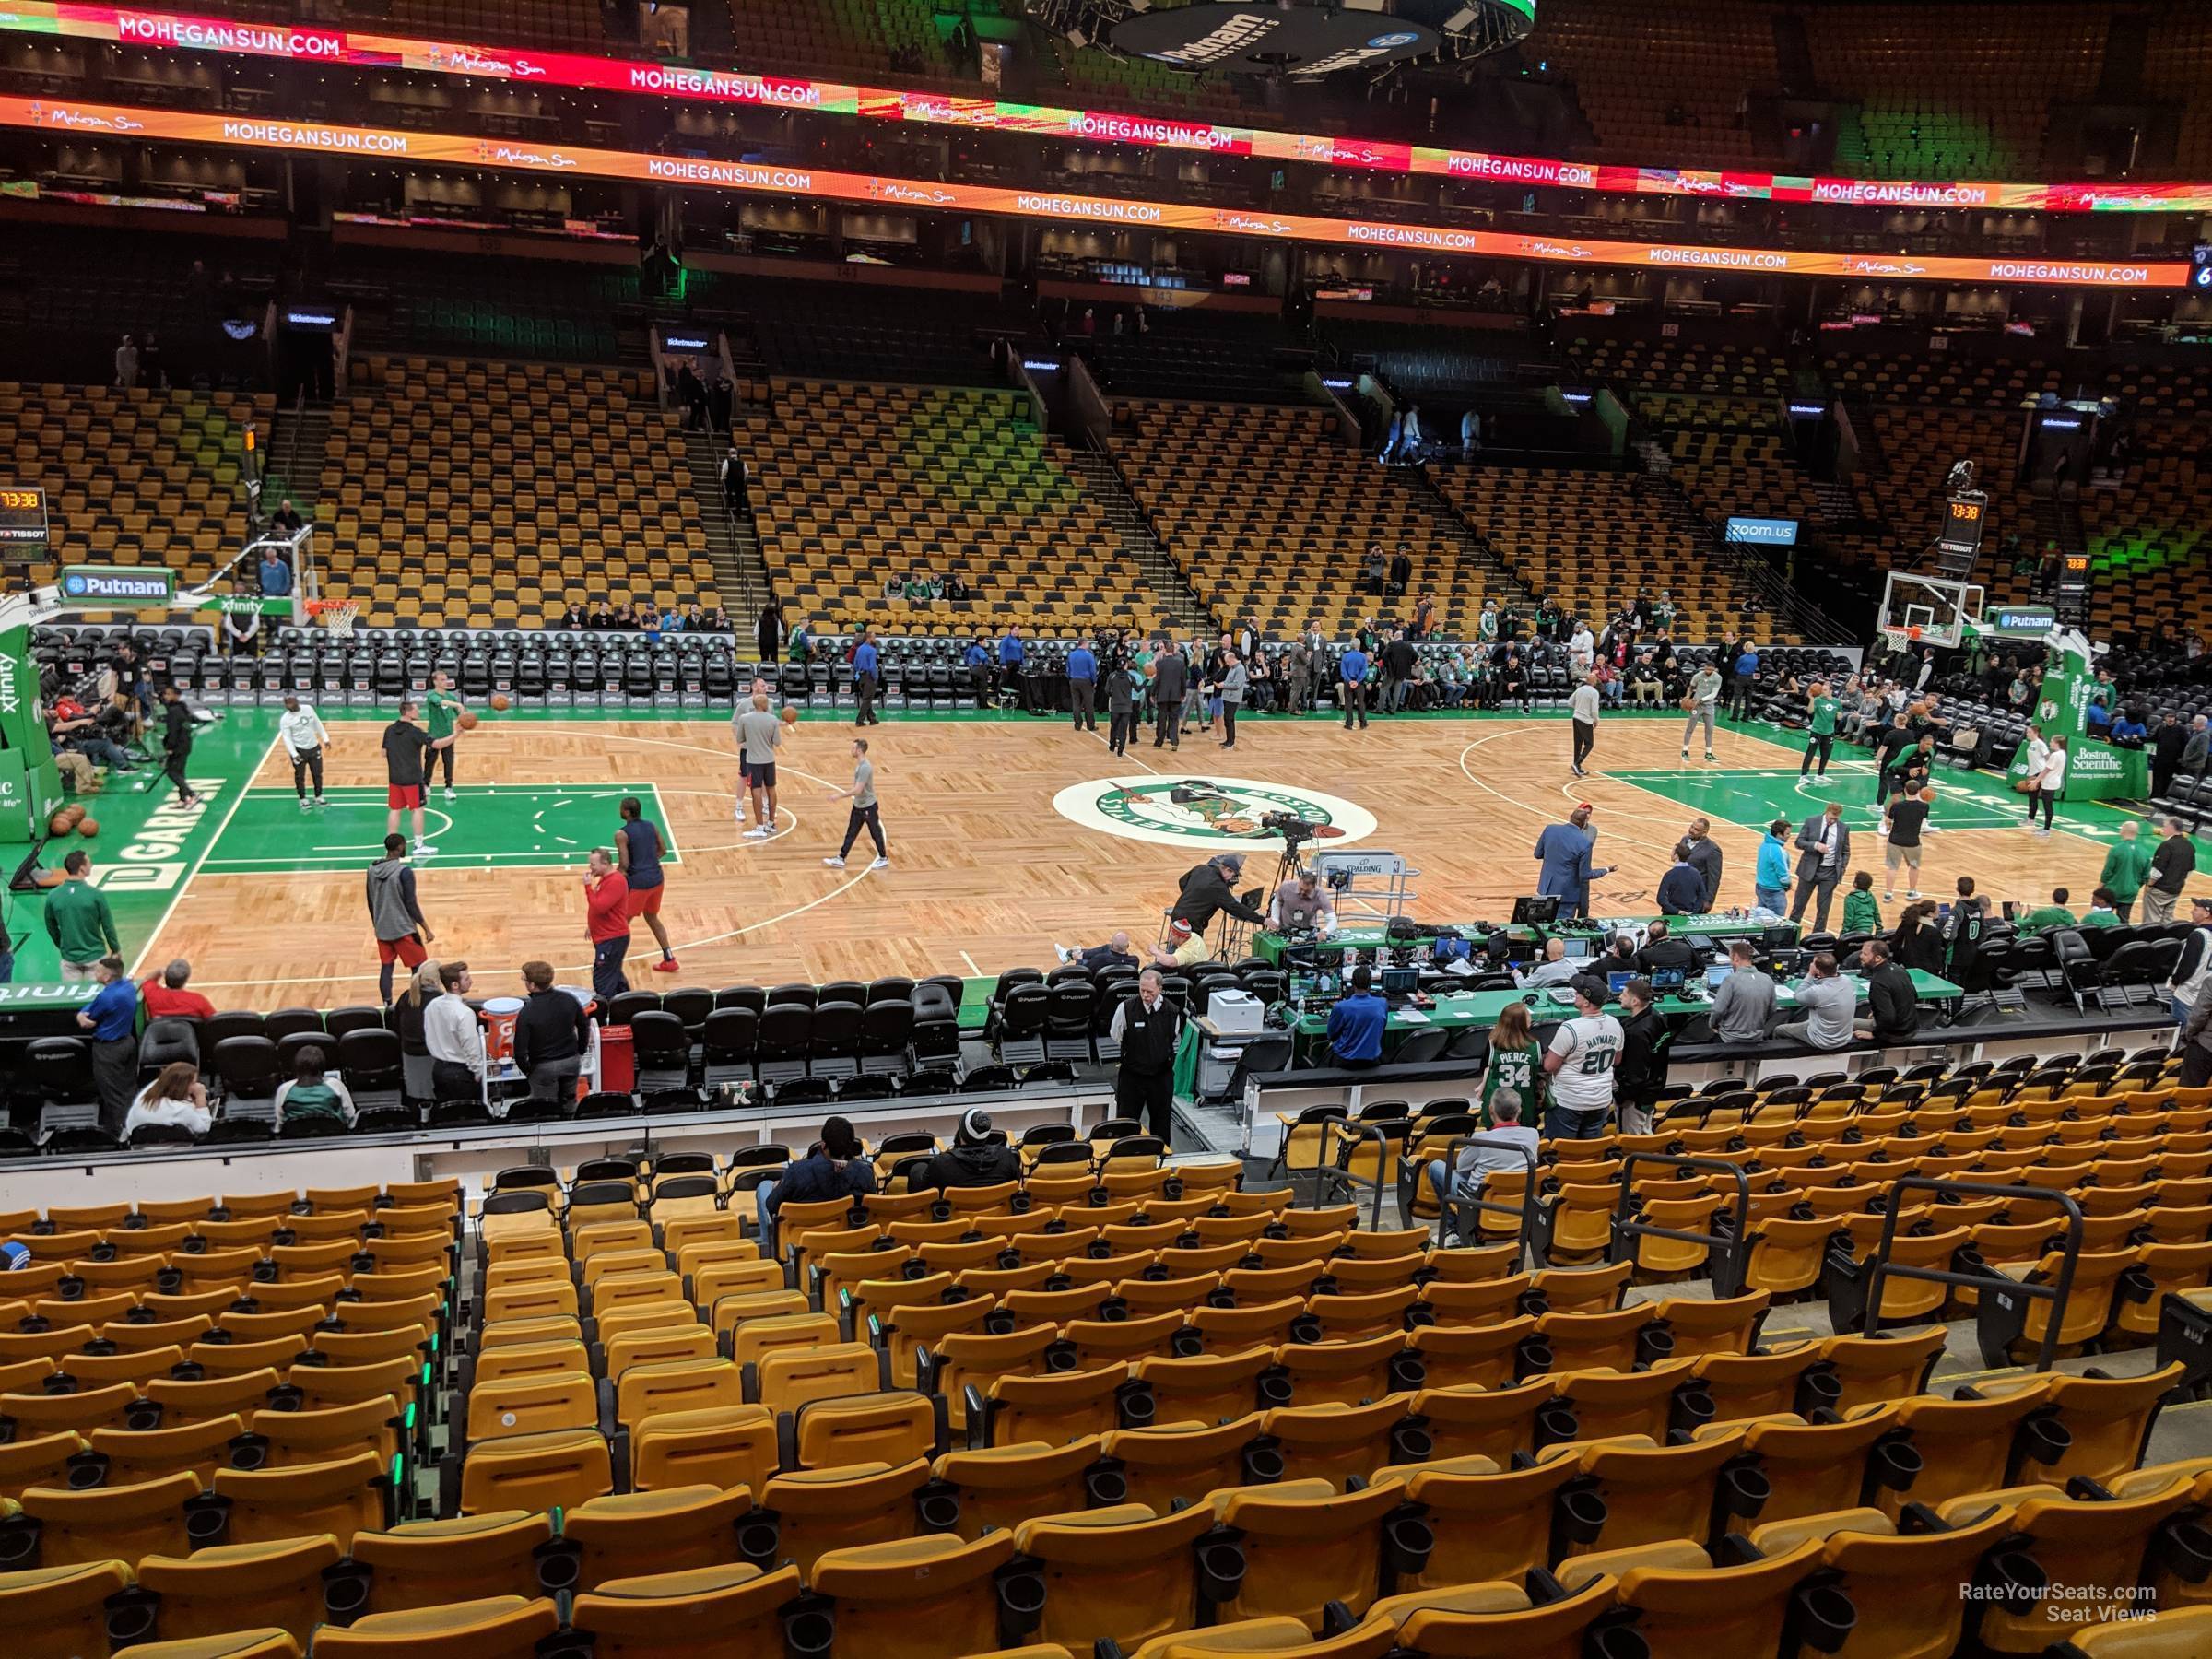 loge 2, row 16 seat view  for basketball - td garden